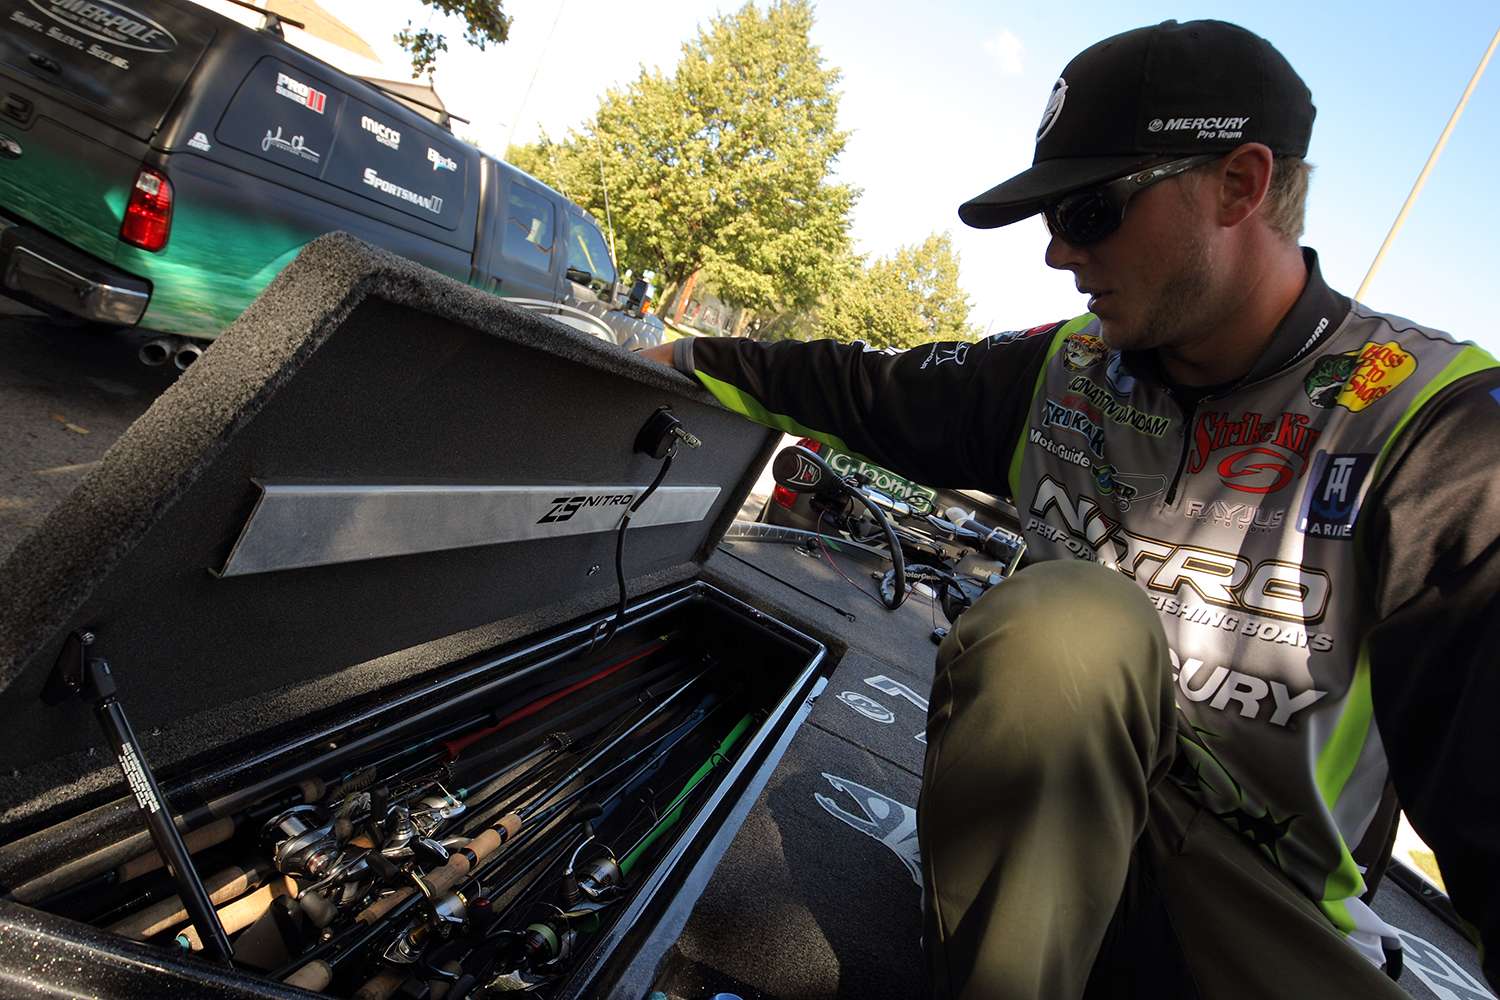 In his left rod locker, VanDam keeps 15 to 20 G.Loomis rods and Shimano reels ready to go.
